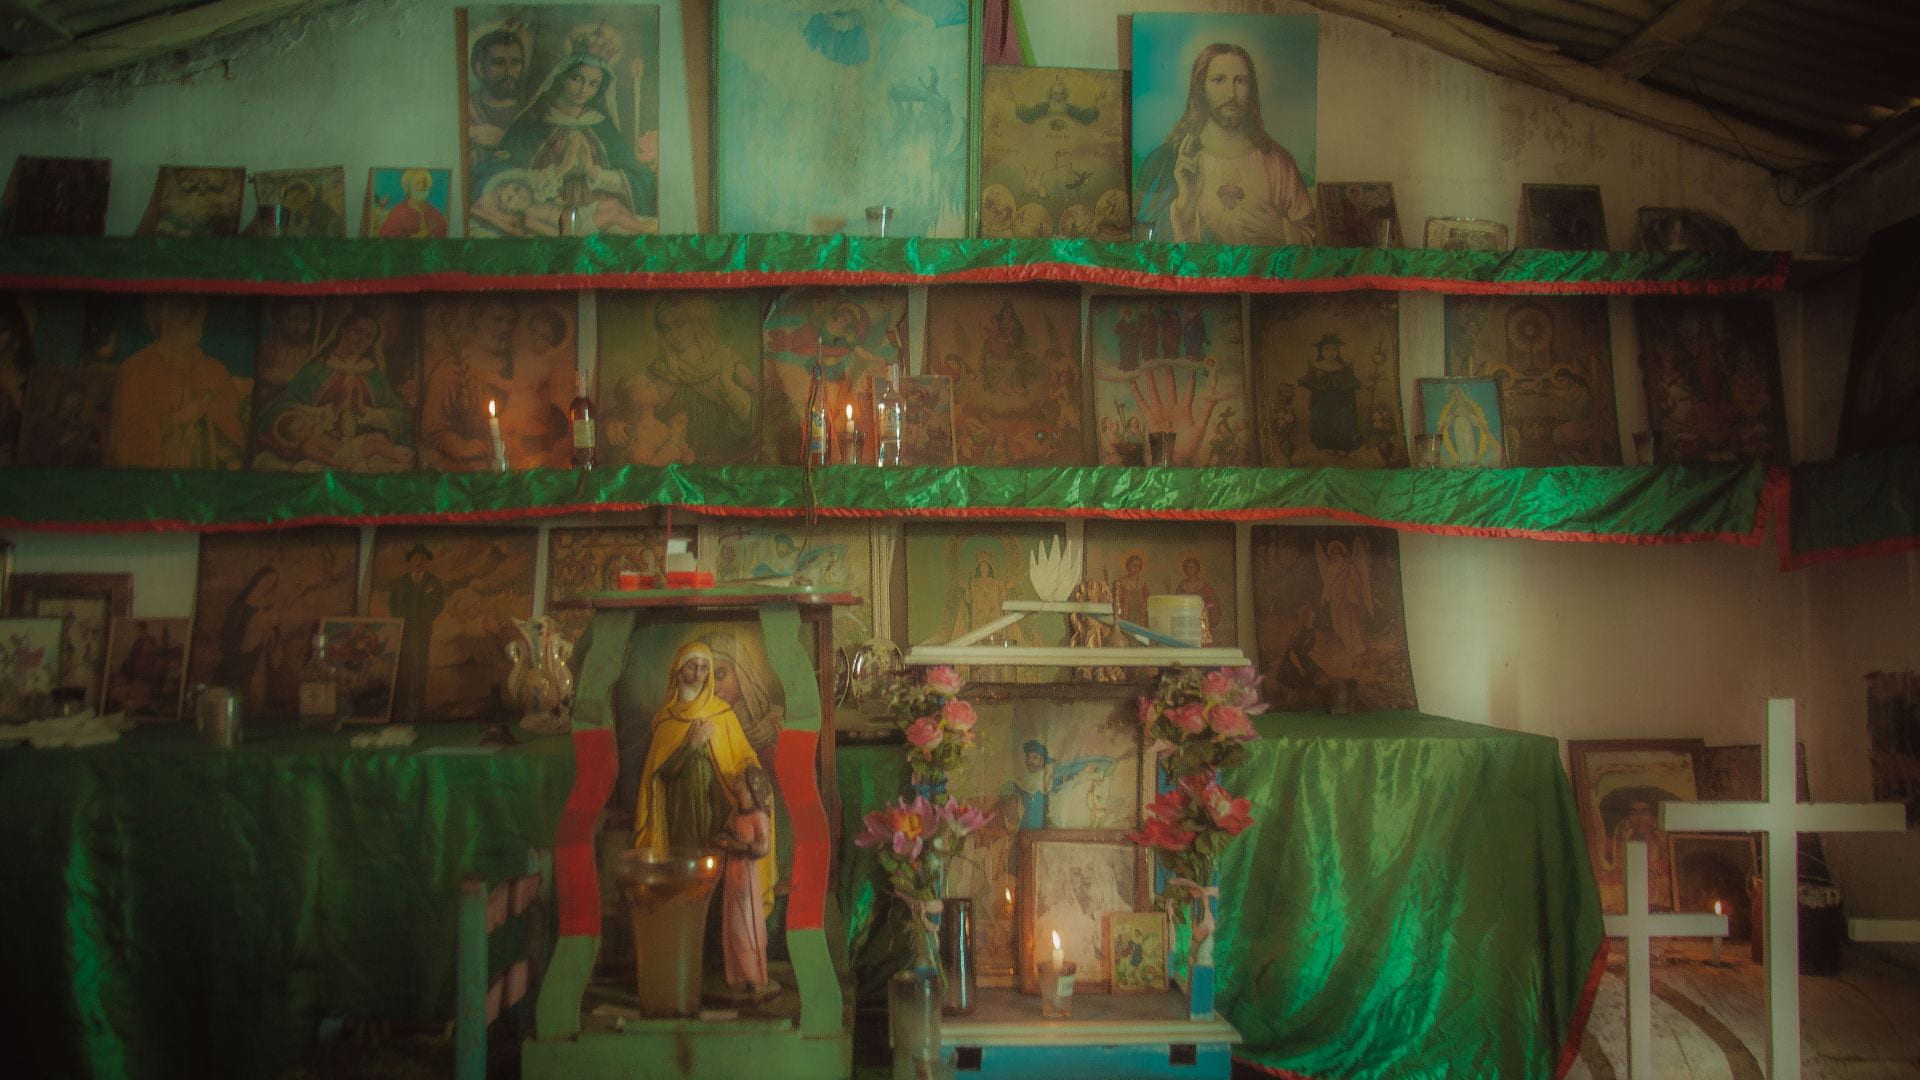 Multiple shelves are lined with shiny green and red fabric, topped with abundant altar items.